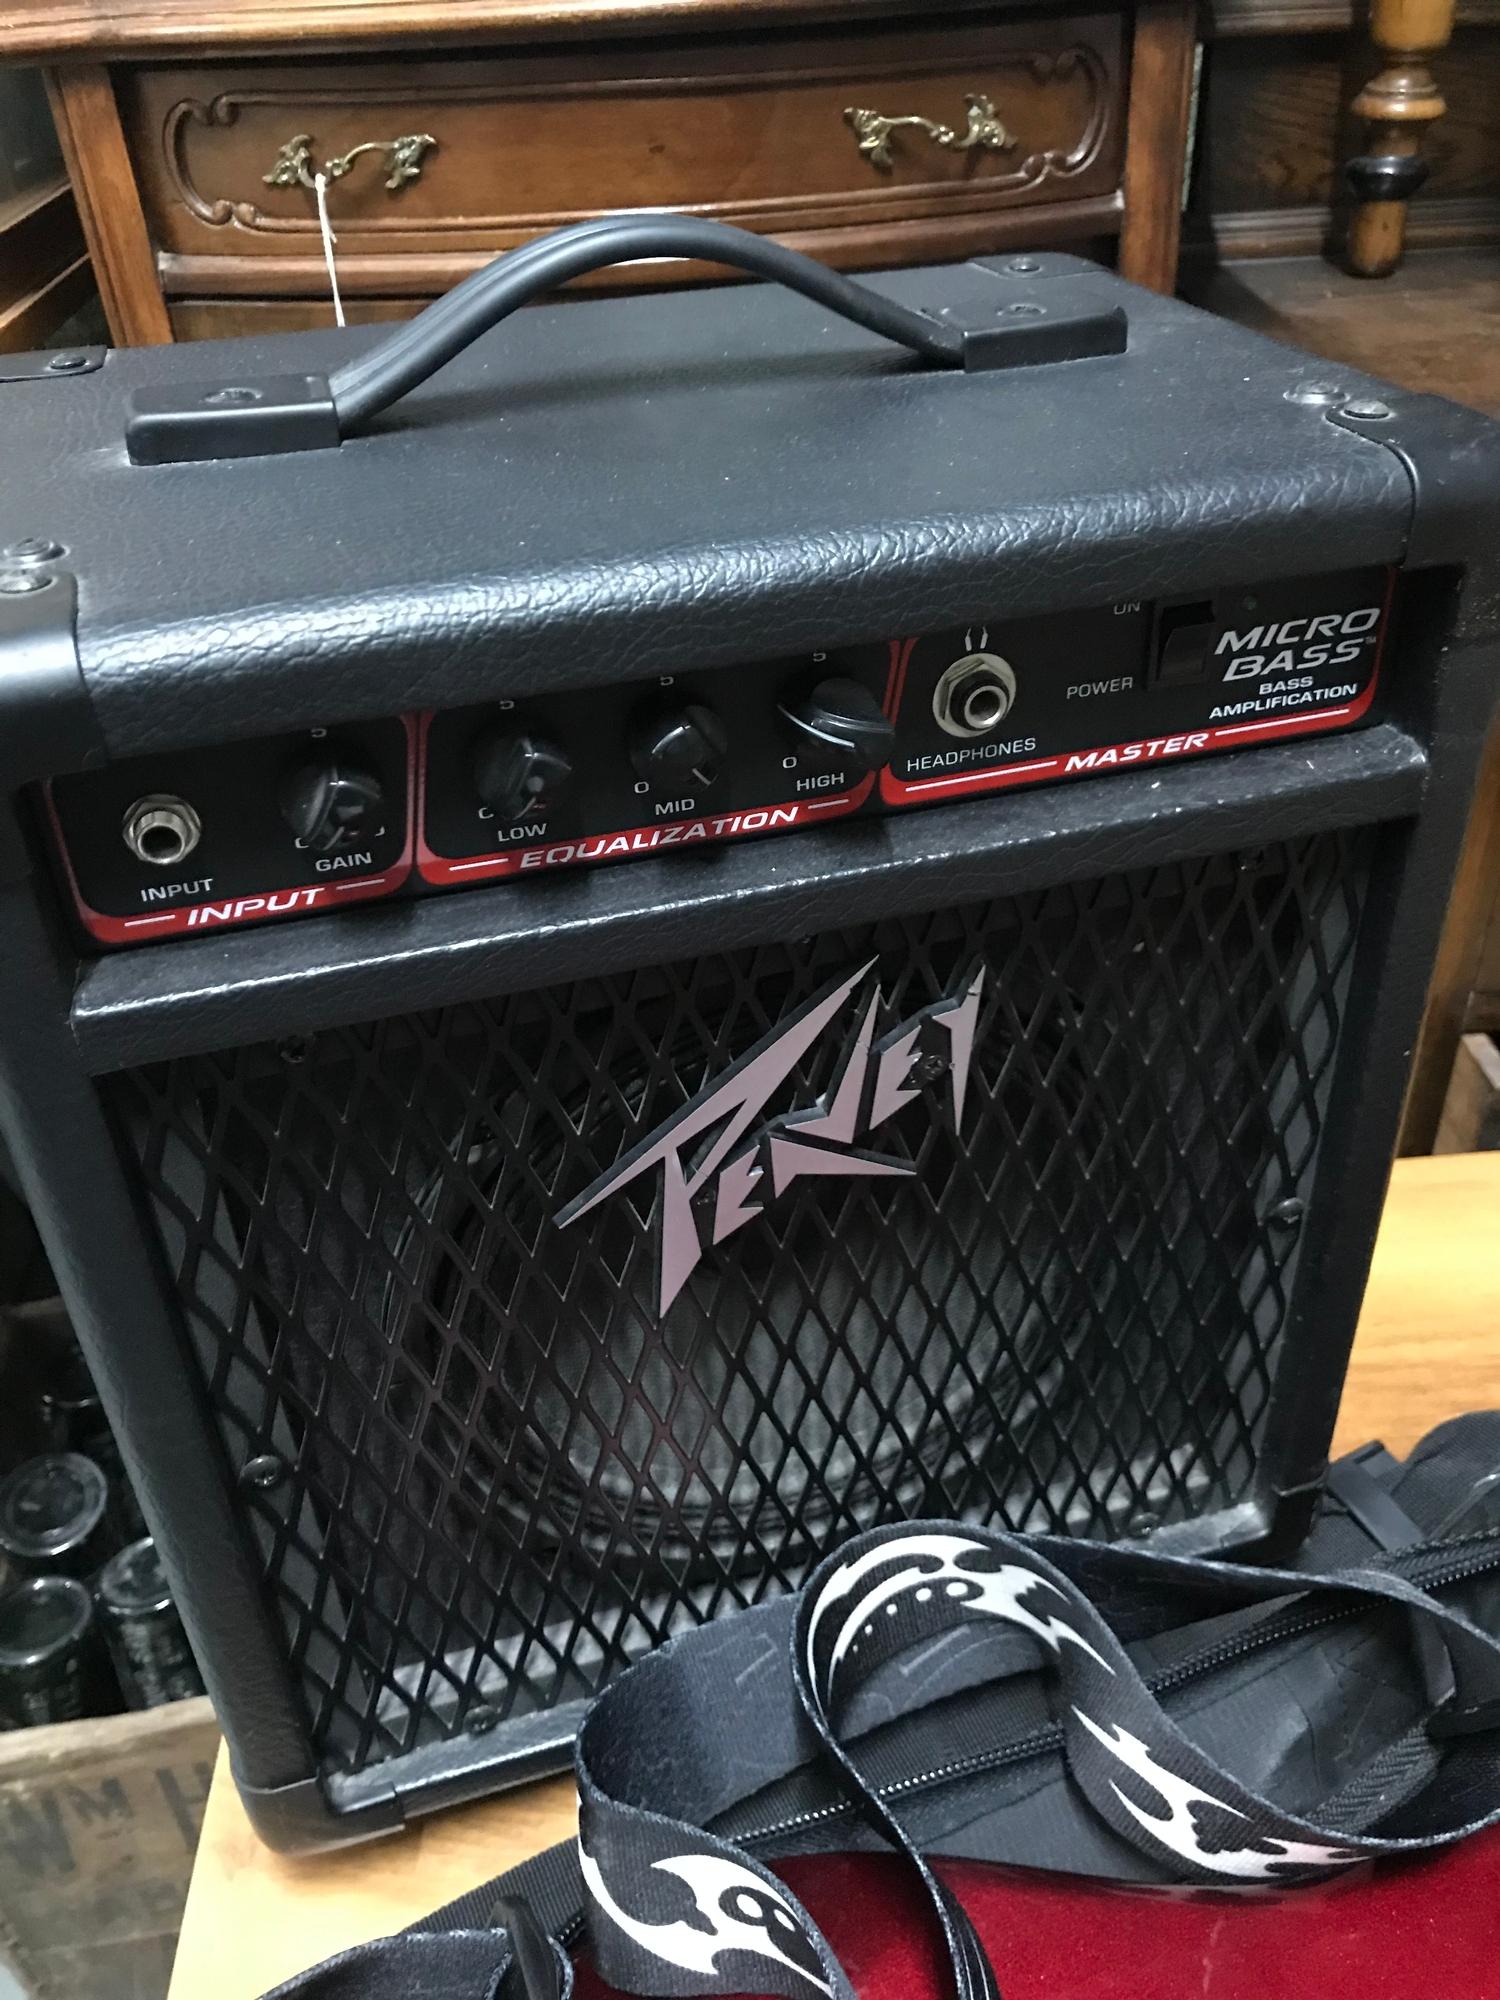 Yamaha Bass Guitar together with Peavey amplifier. - Image 3 of 3